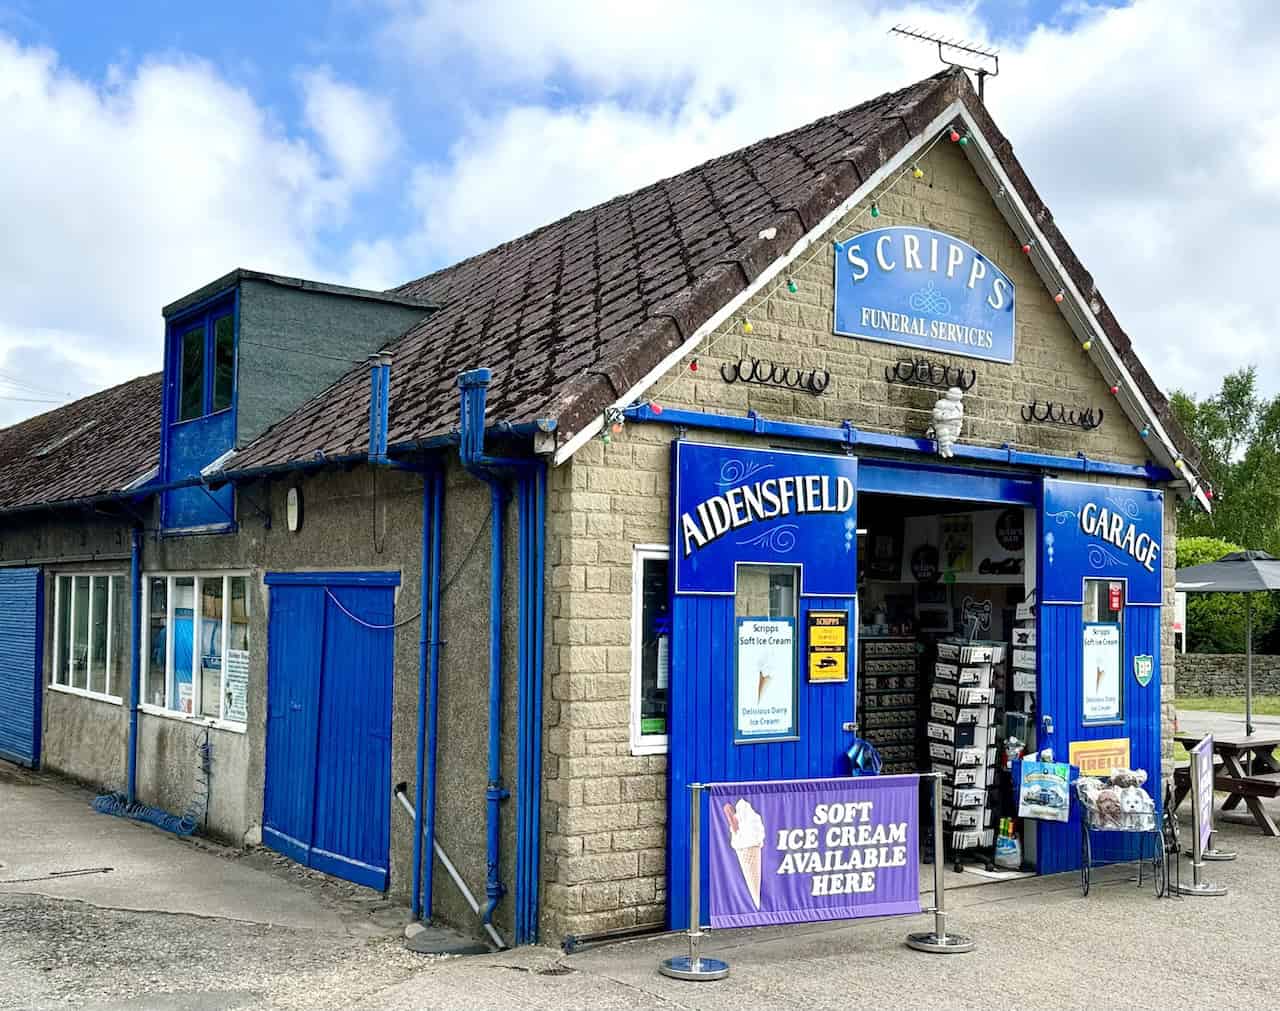 Scripps Garage and Funeral Services in Goathland, a notable landmark from the British TV series Heartbeat, which aired from 1992 to 2010. The garage was run by the character Bernie Scripps in the series.
